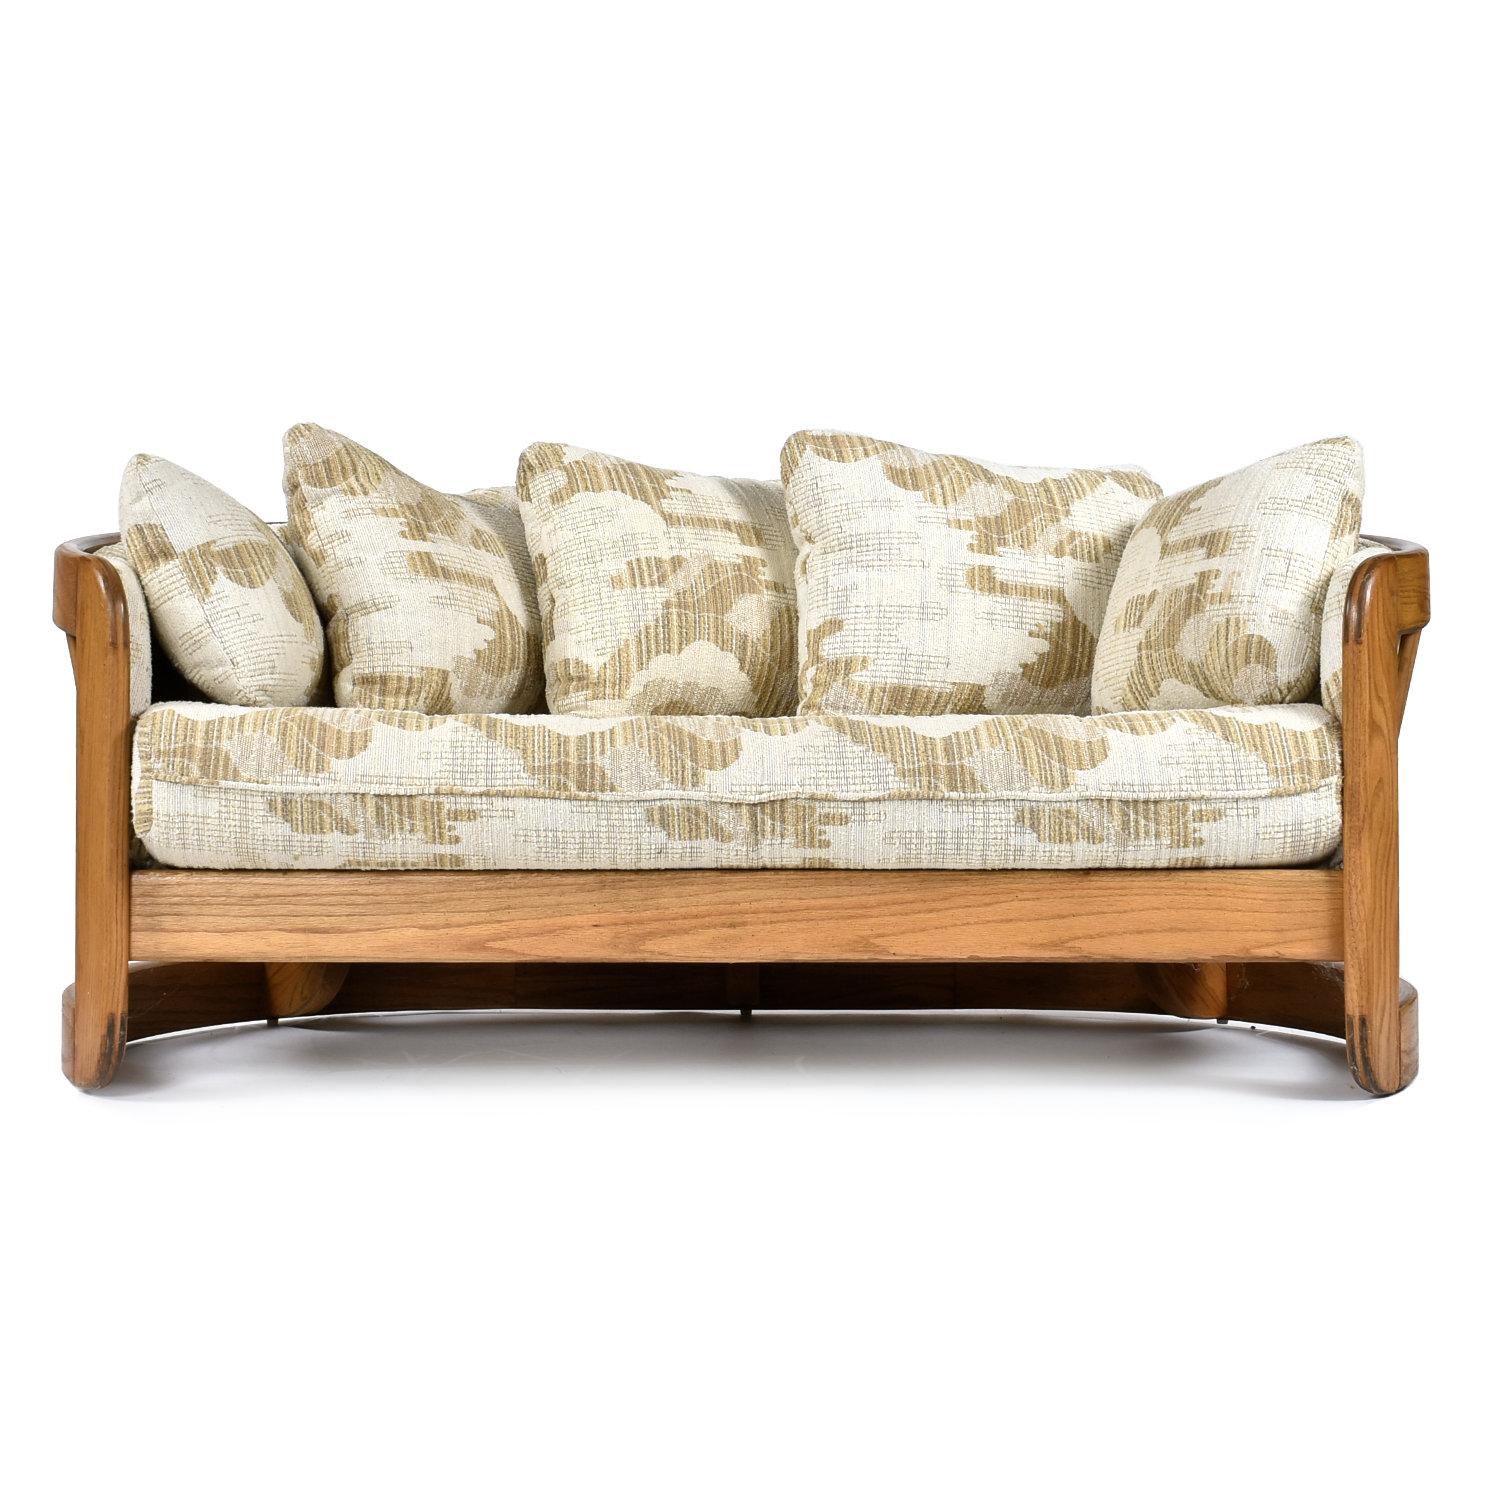 American Pair of Solid Oak Wood Curved Spindle Back Loveseat Settee Benches by Howard